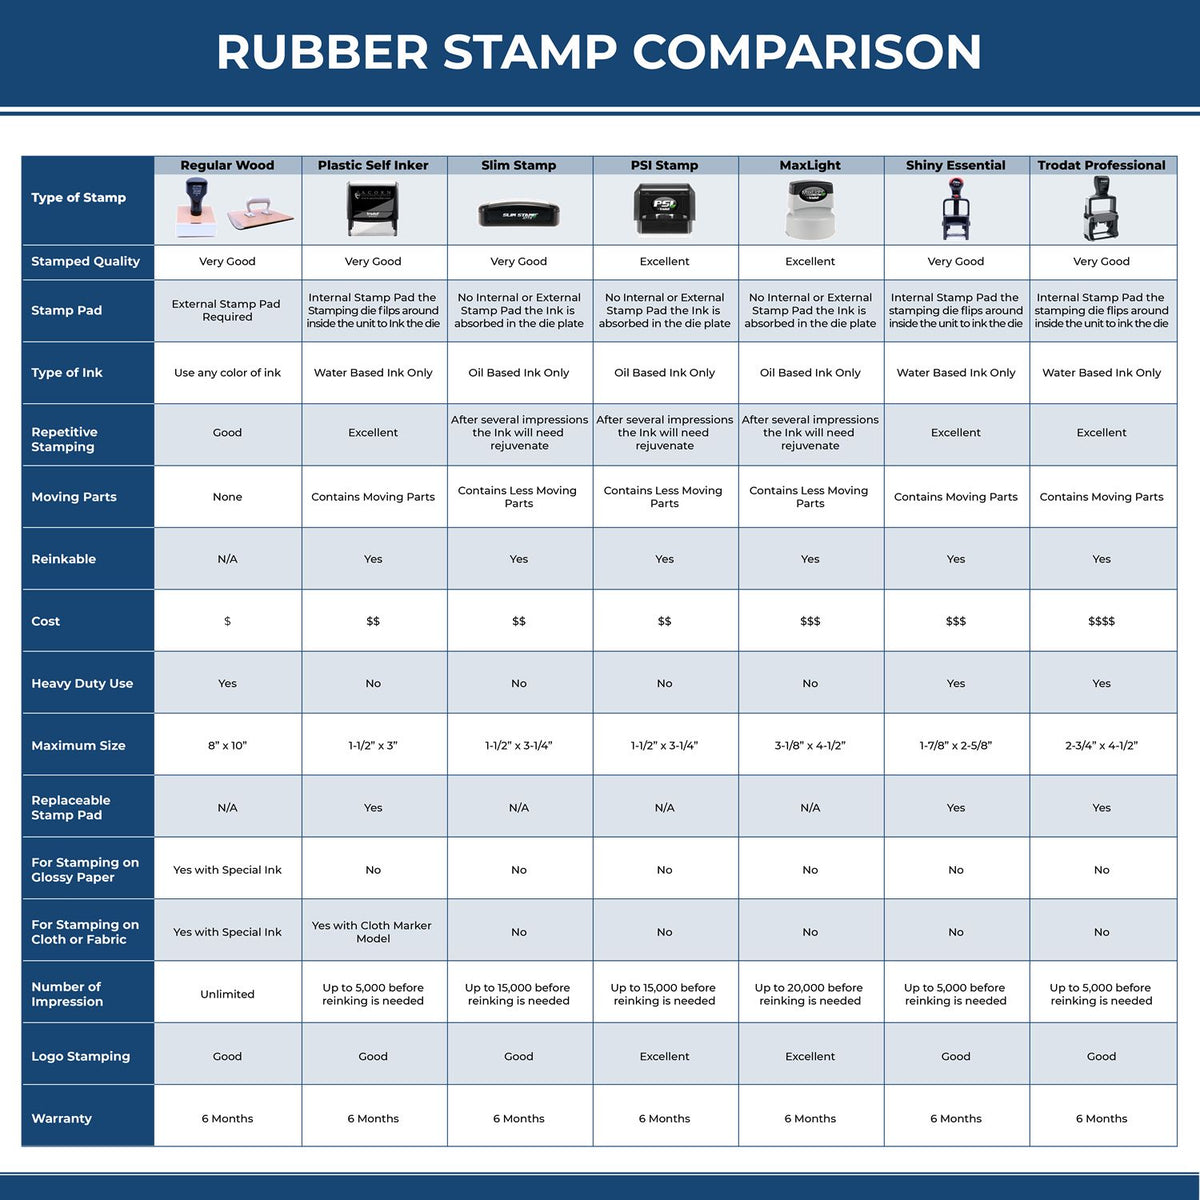 Received with Line Rubber Stamp 4809R Rubber Stamp Comparison